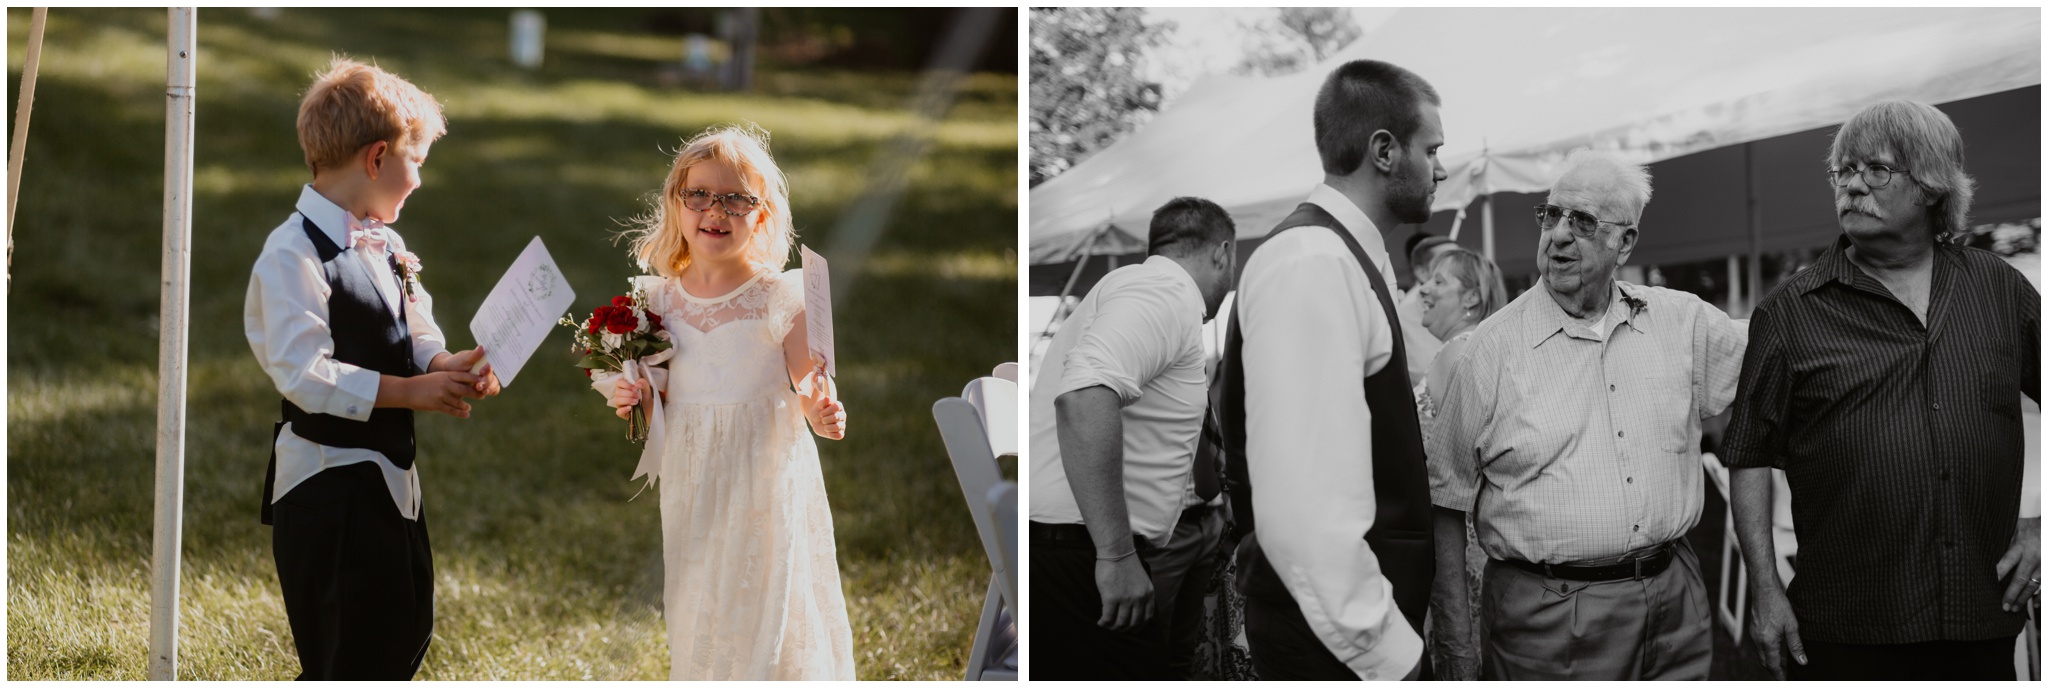 The Morros Chicago Wedding Photography John and Paige July Minnesota Outdoor Wedding_0213.jpg